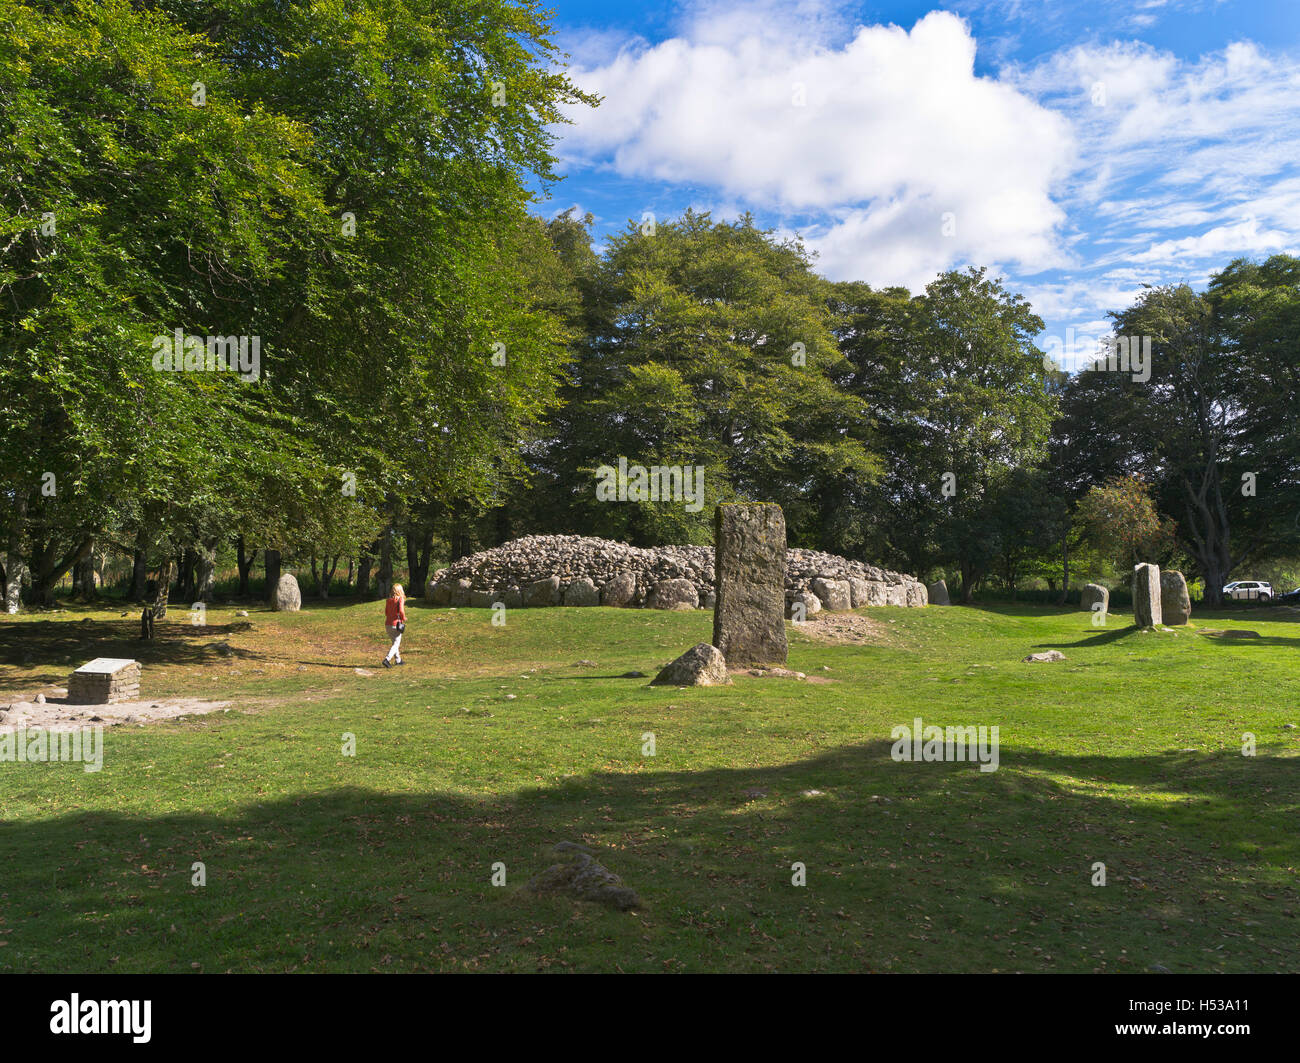 dh Balnuaran of Clava CULLODEN MOOR INVERNESS SHIRE Clava Cairns bronze age cairn passage Scotland neolithic tomb uk mound Stock Photo